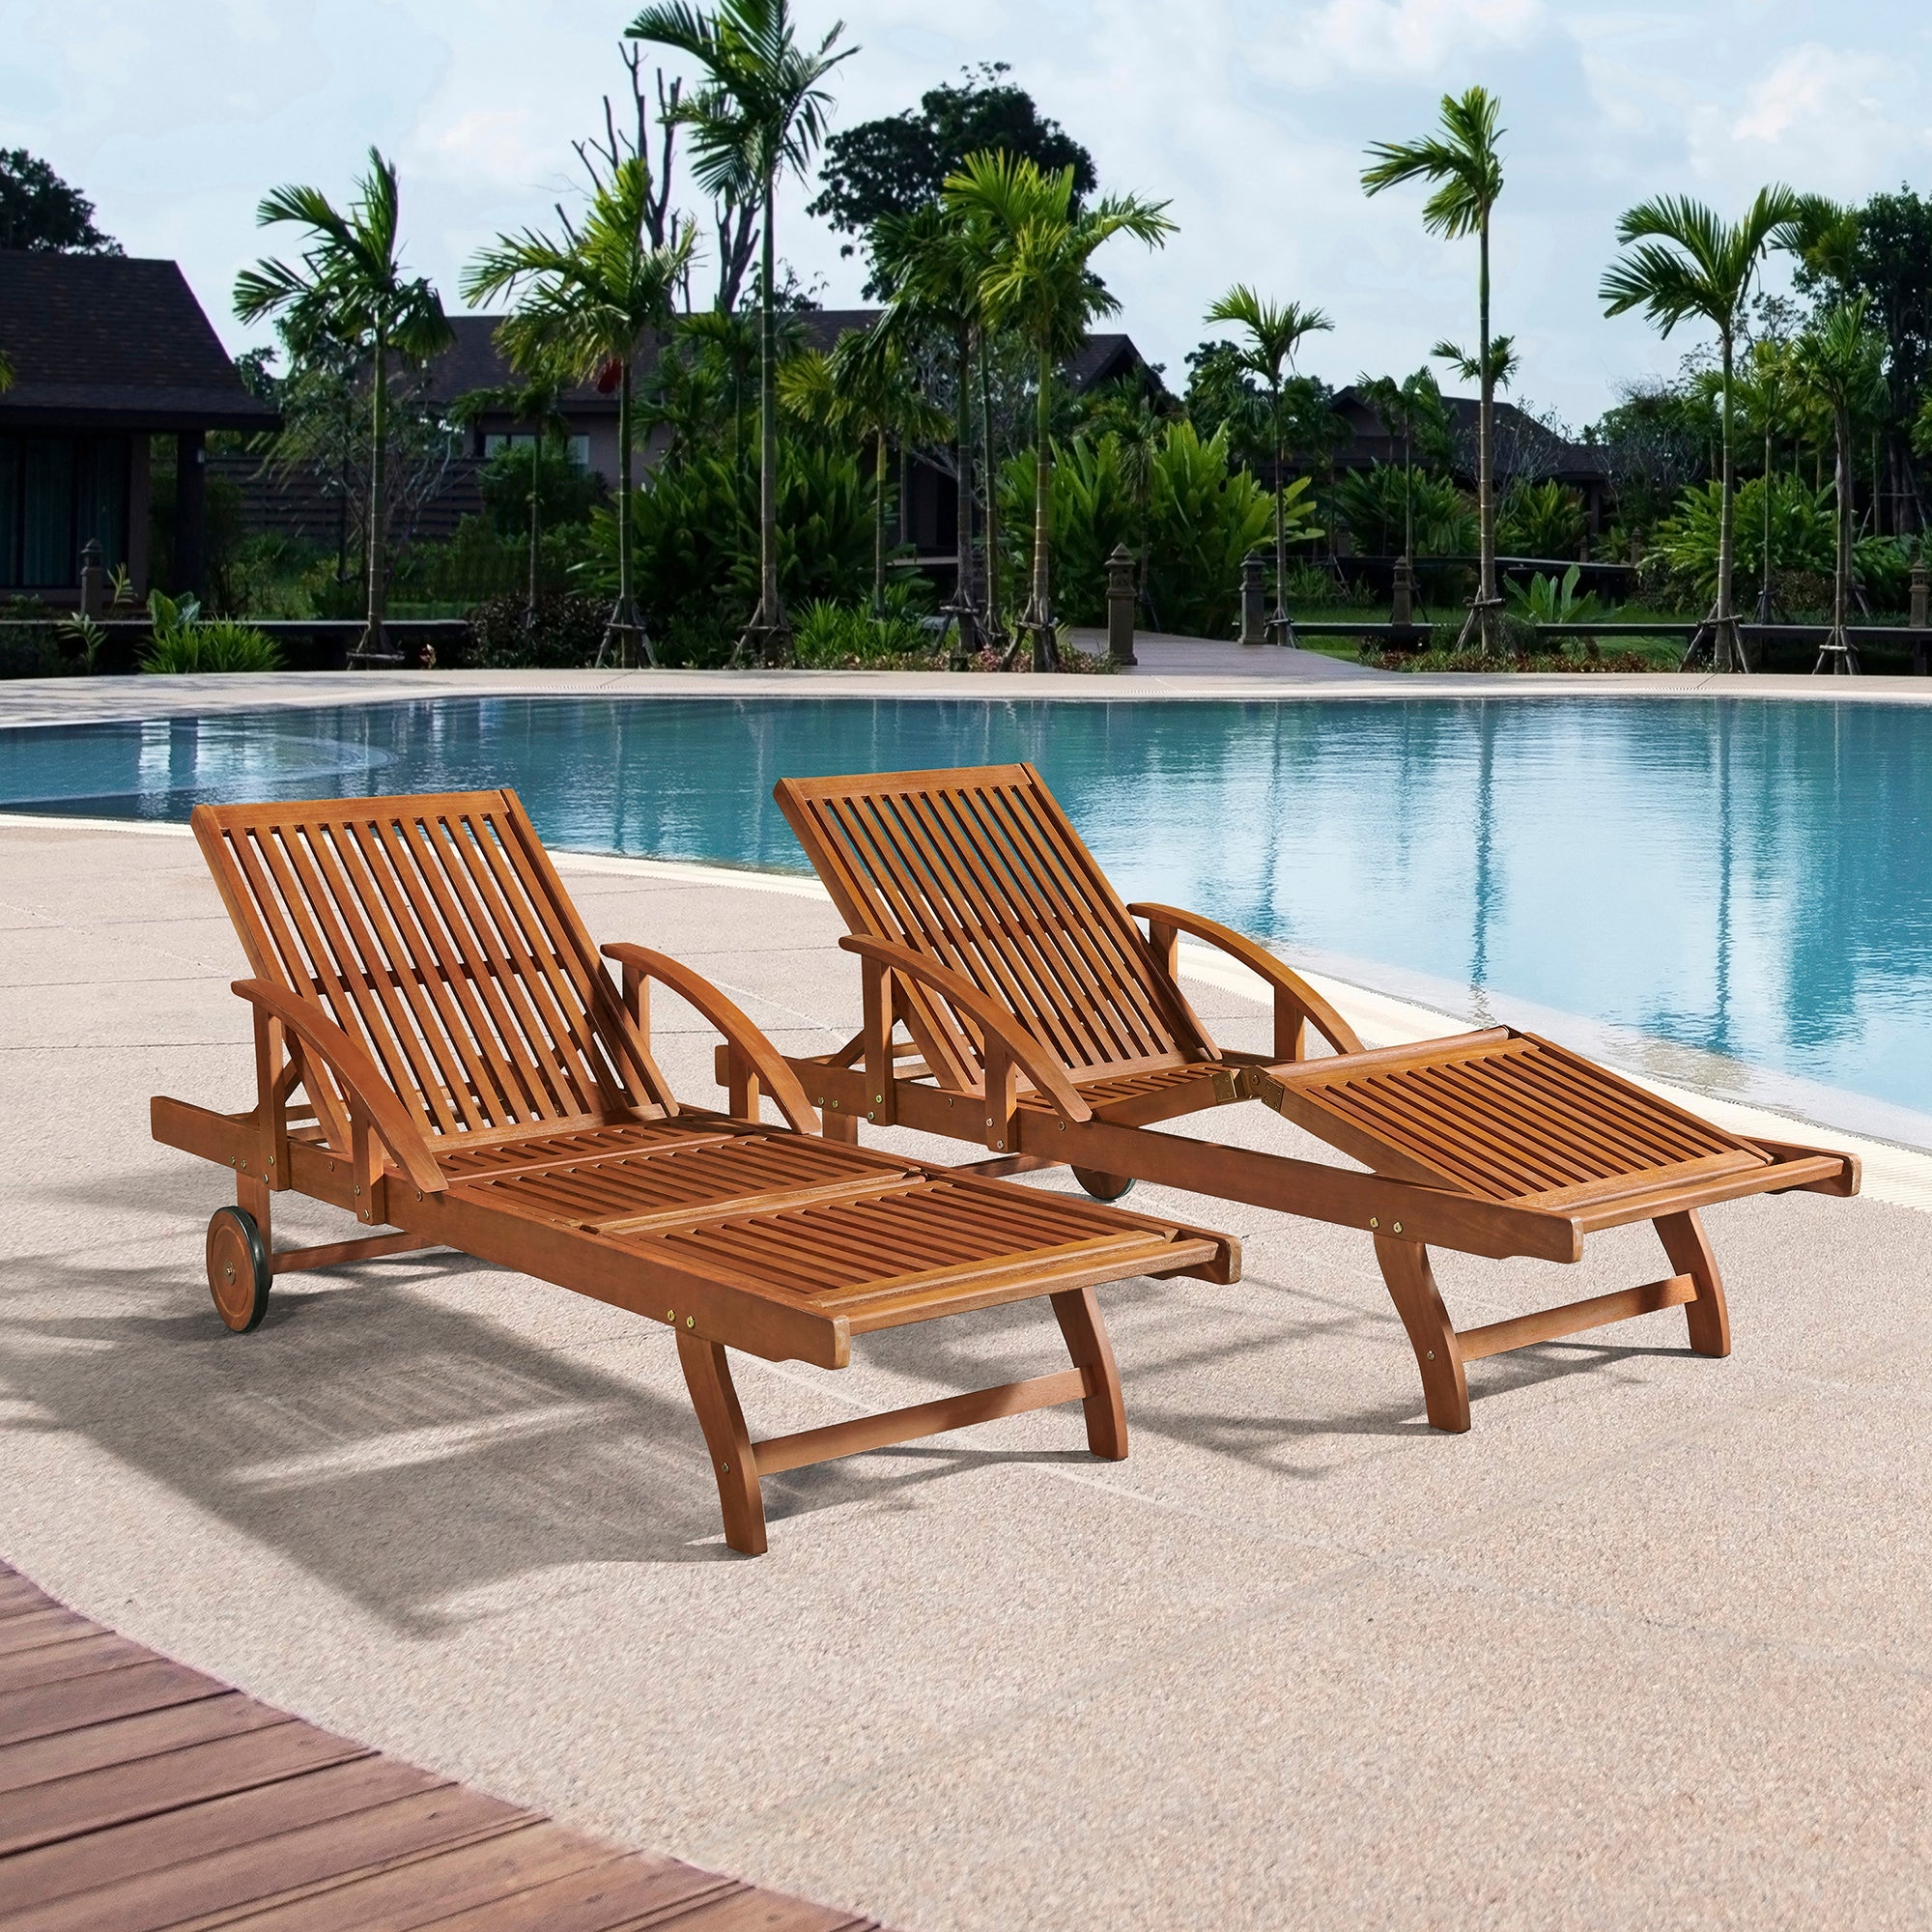 Light-Brown-Oil-Caspian-Eucalyptus-Wood-Outdoor-Lounge-Chair-with-Arms-and-Adjustable-Leg-Rest,-Set-of-2-Outdoor-Seating